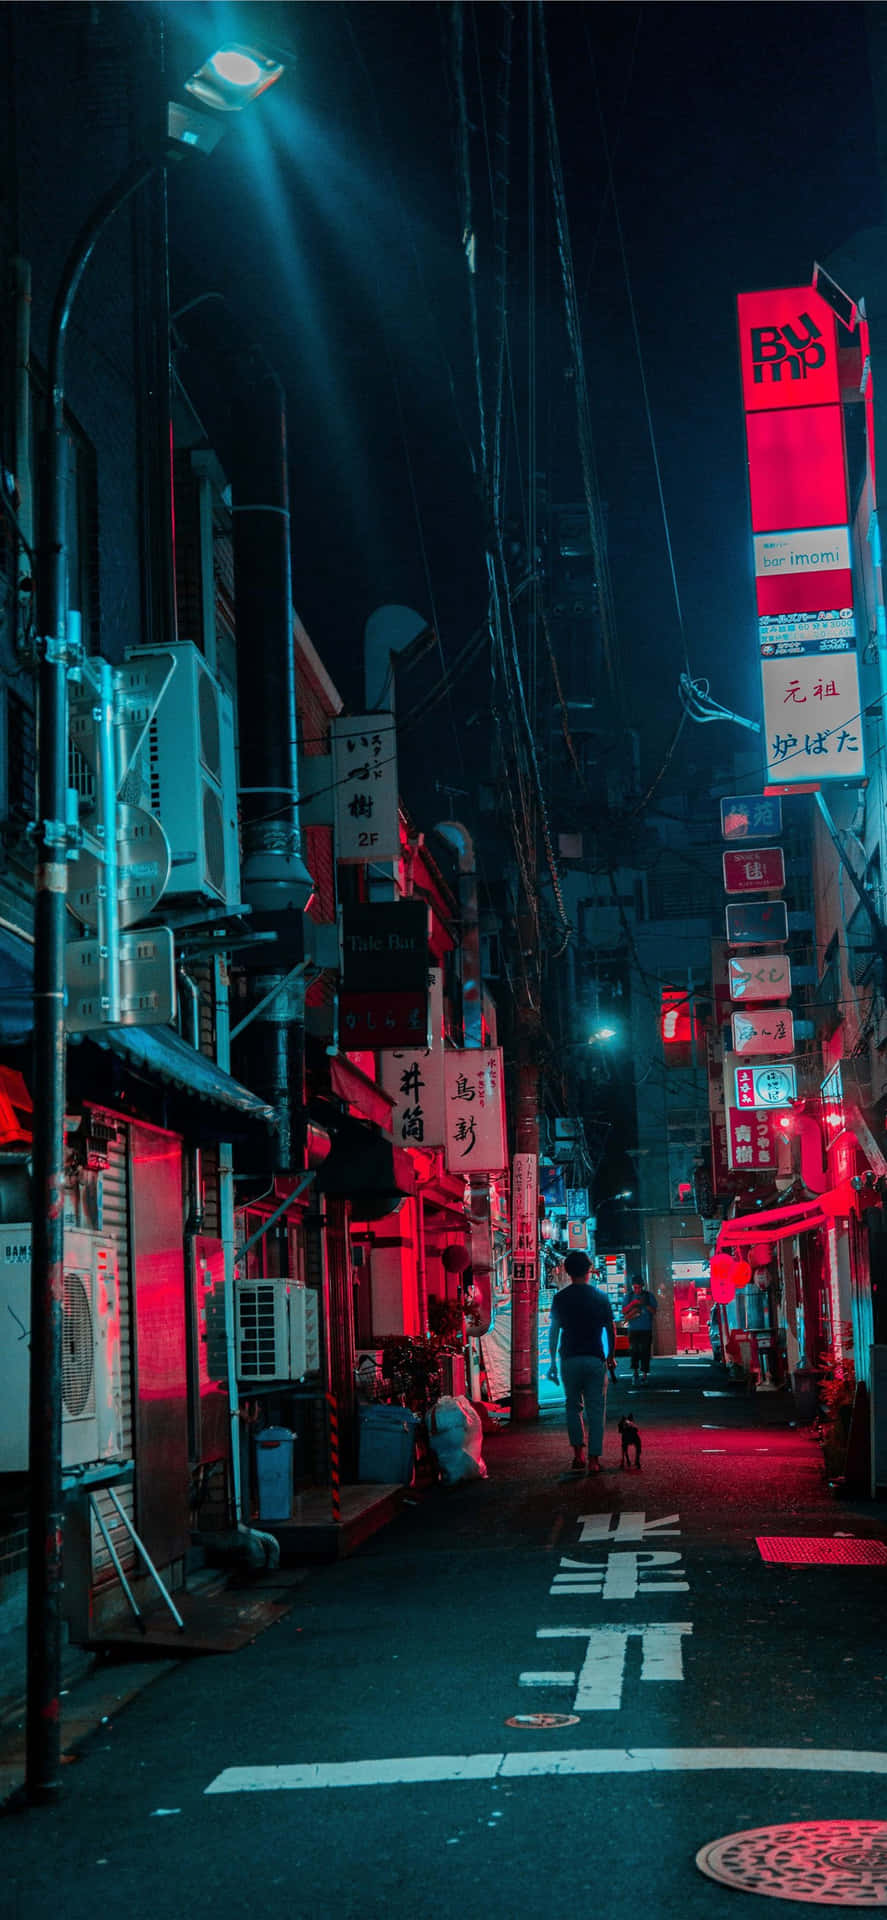 Bustling Nightlife in the Red Light District Wallpaper